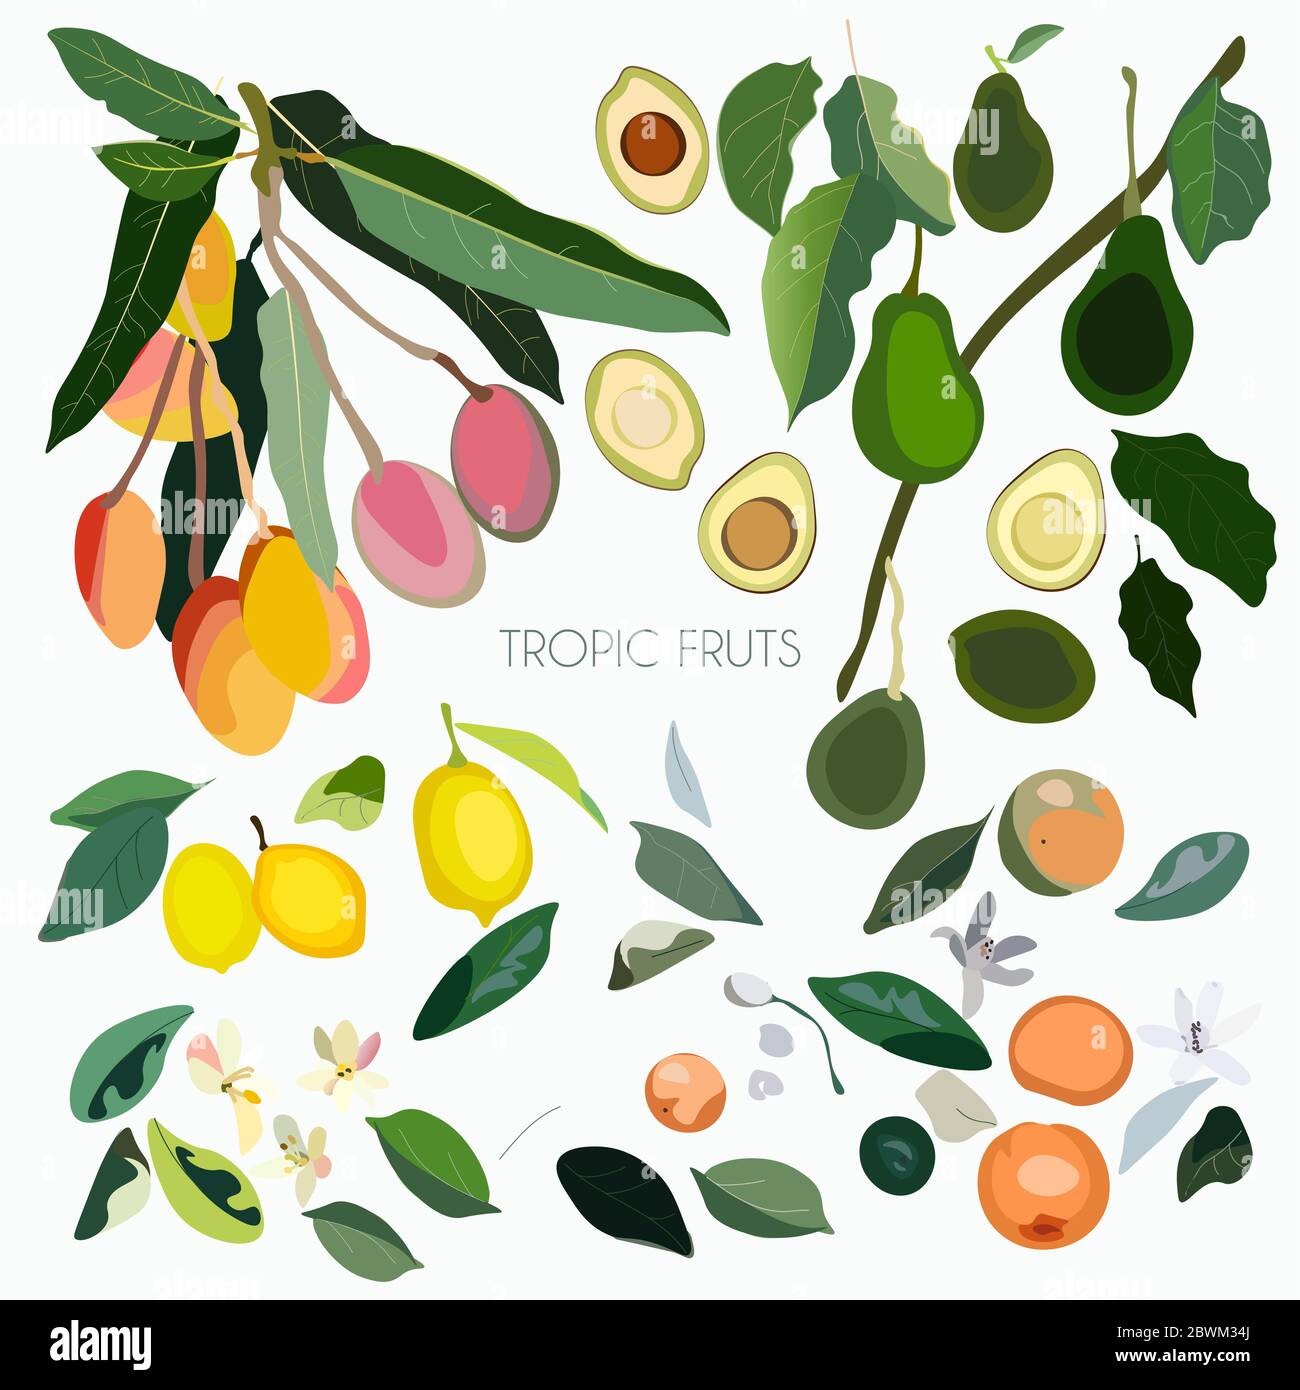 Vector illustration with leaves, inflorescences, branches and fruits exotic trees on a white background.  Orange, mango, lemon, avocado plants. EPS 10 Stock Photo